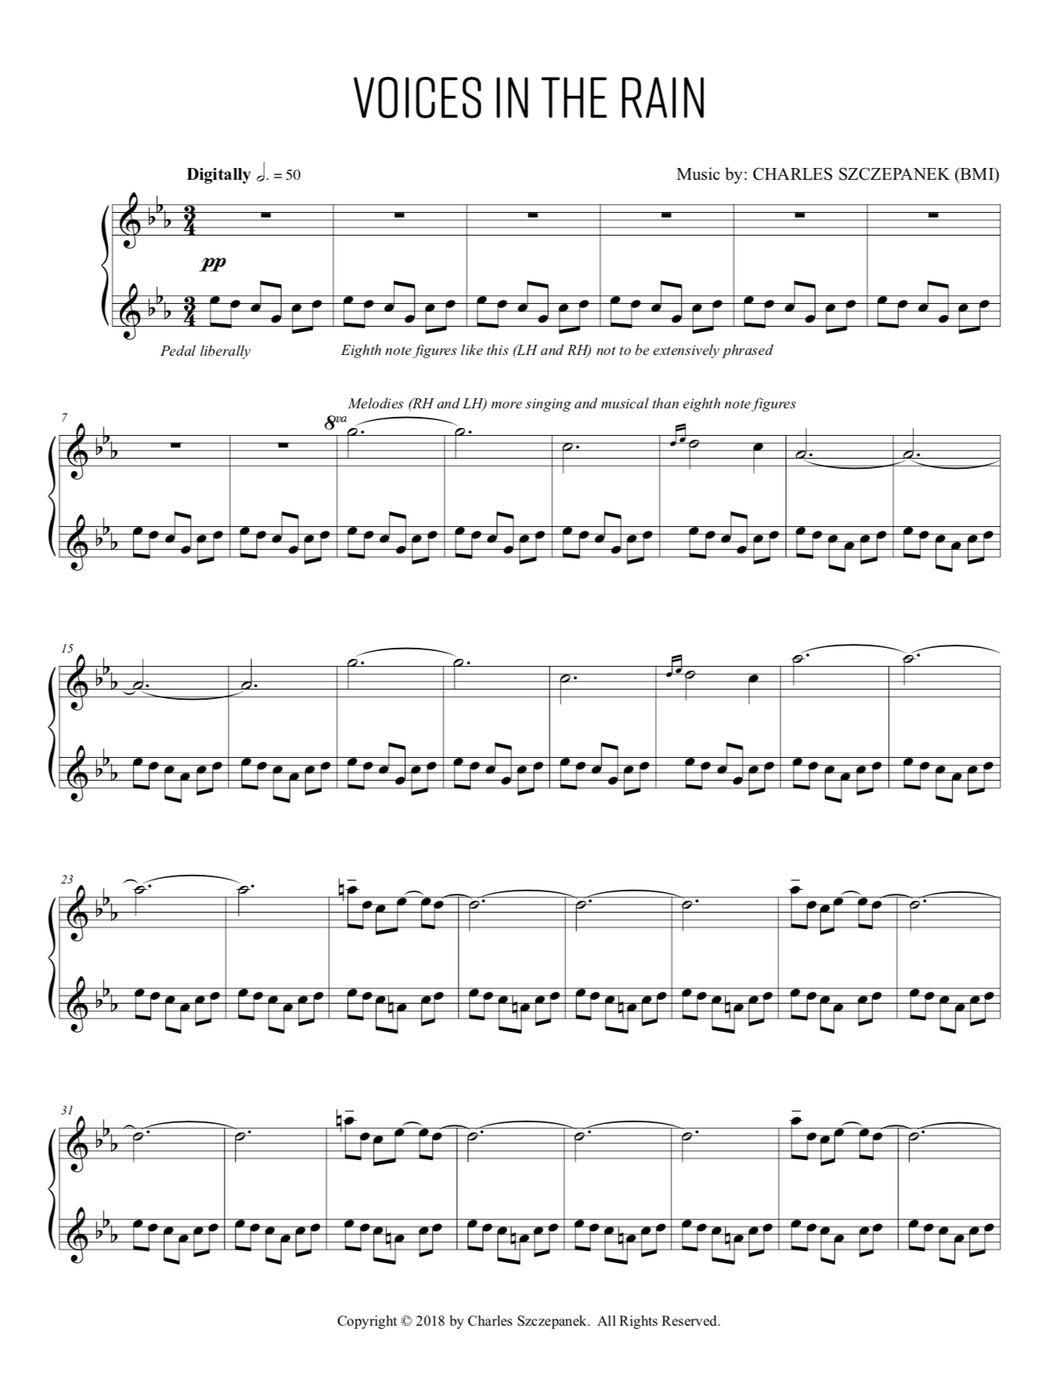 Voices in the Rain-Sheet Music for solo piano